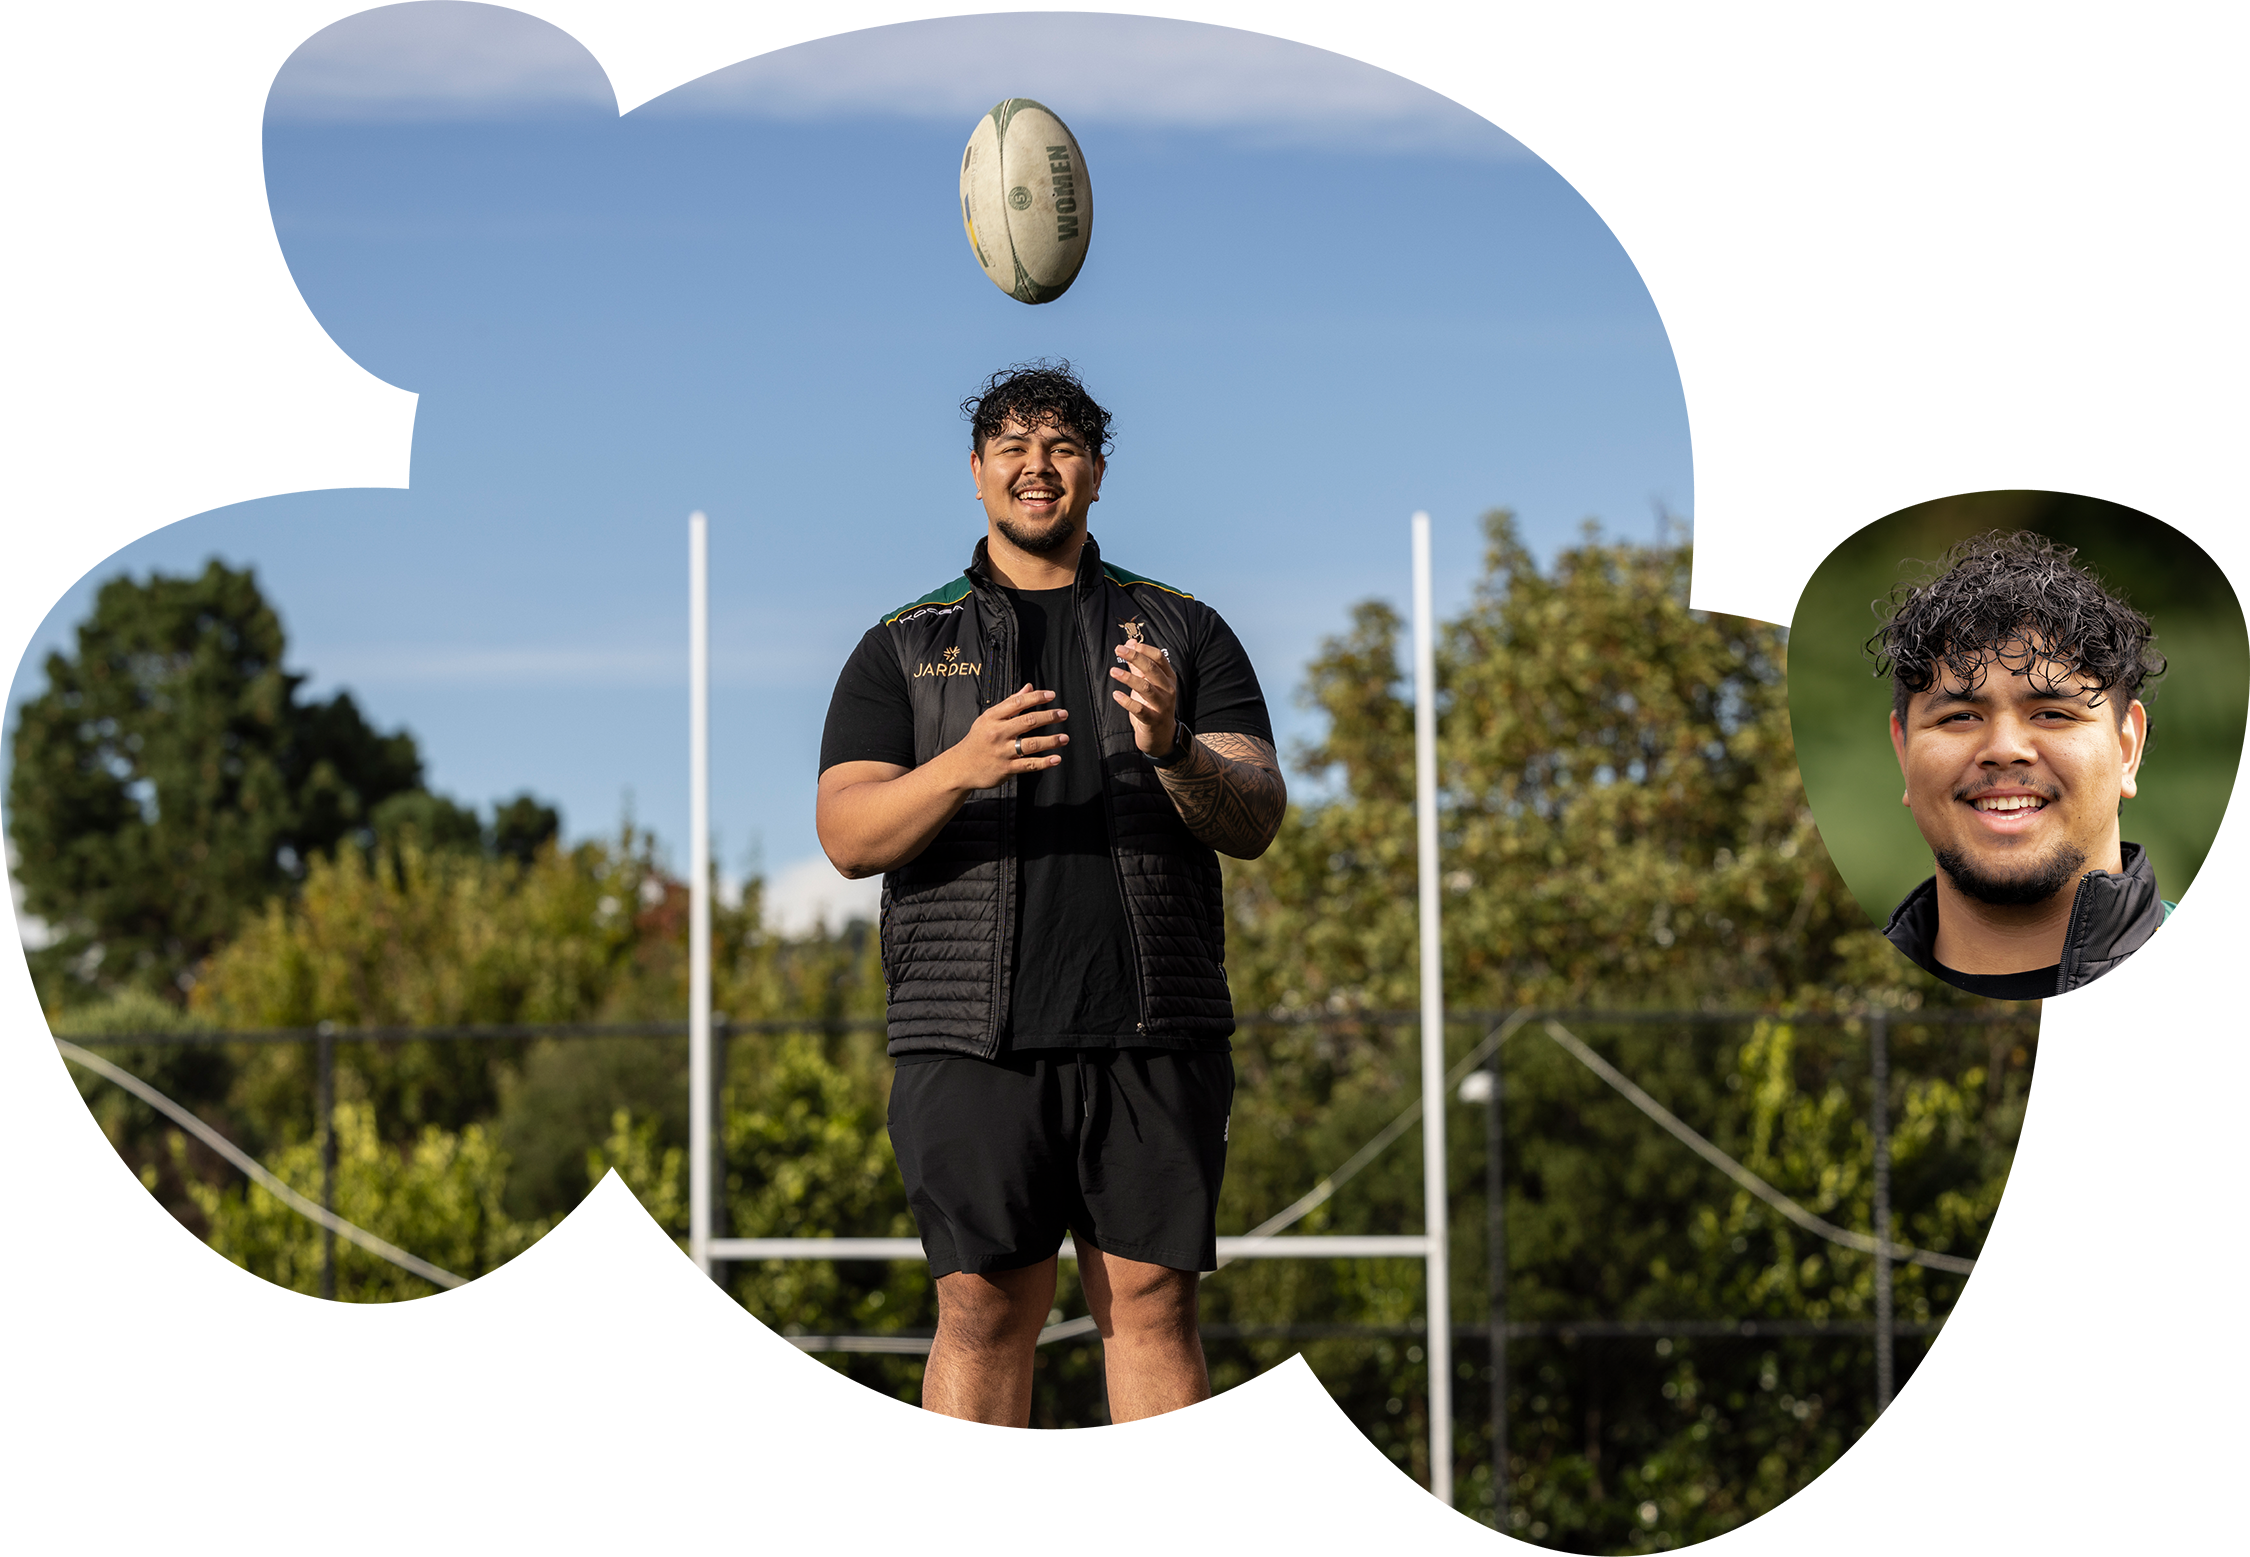 RealMe photo of young man playing rugby in Wellington, New Zealand